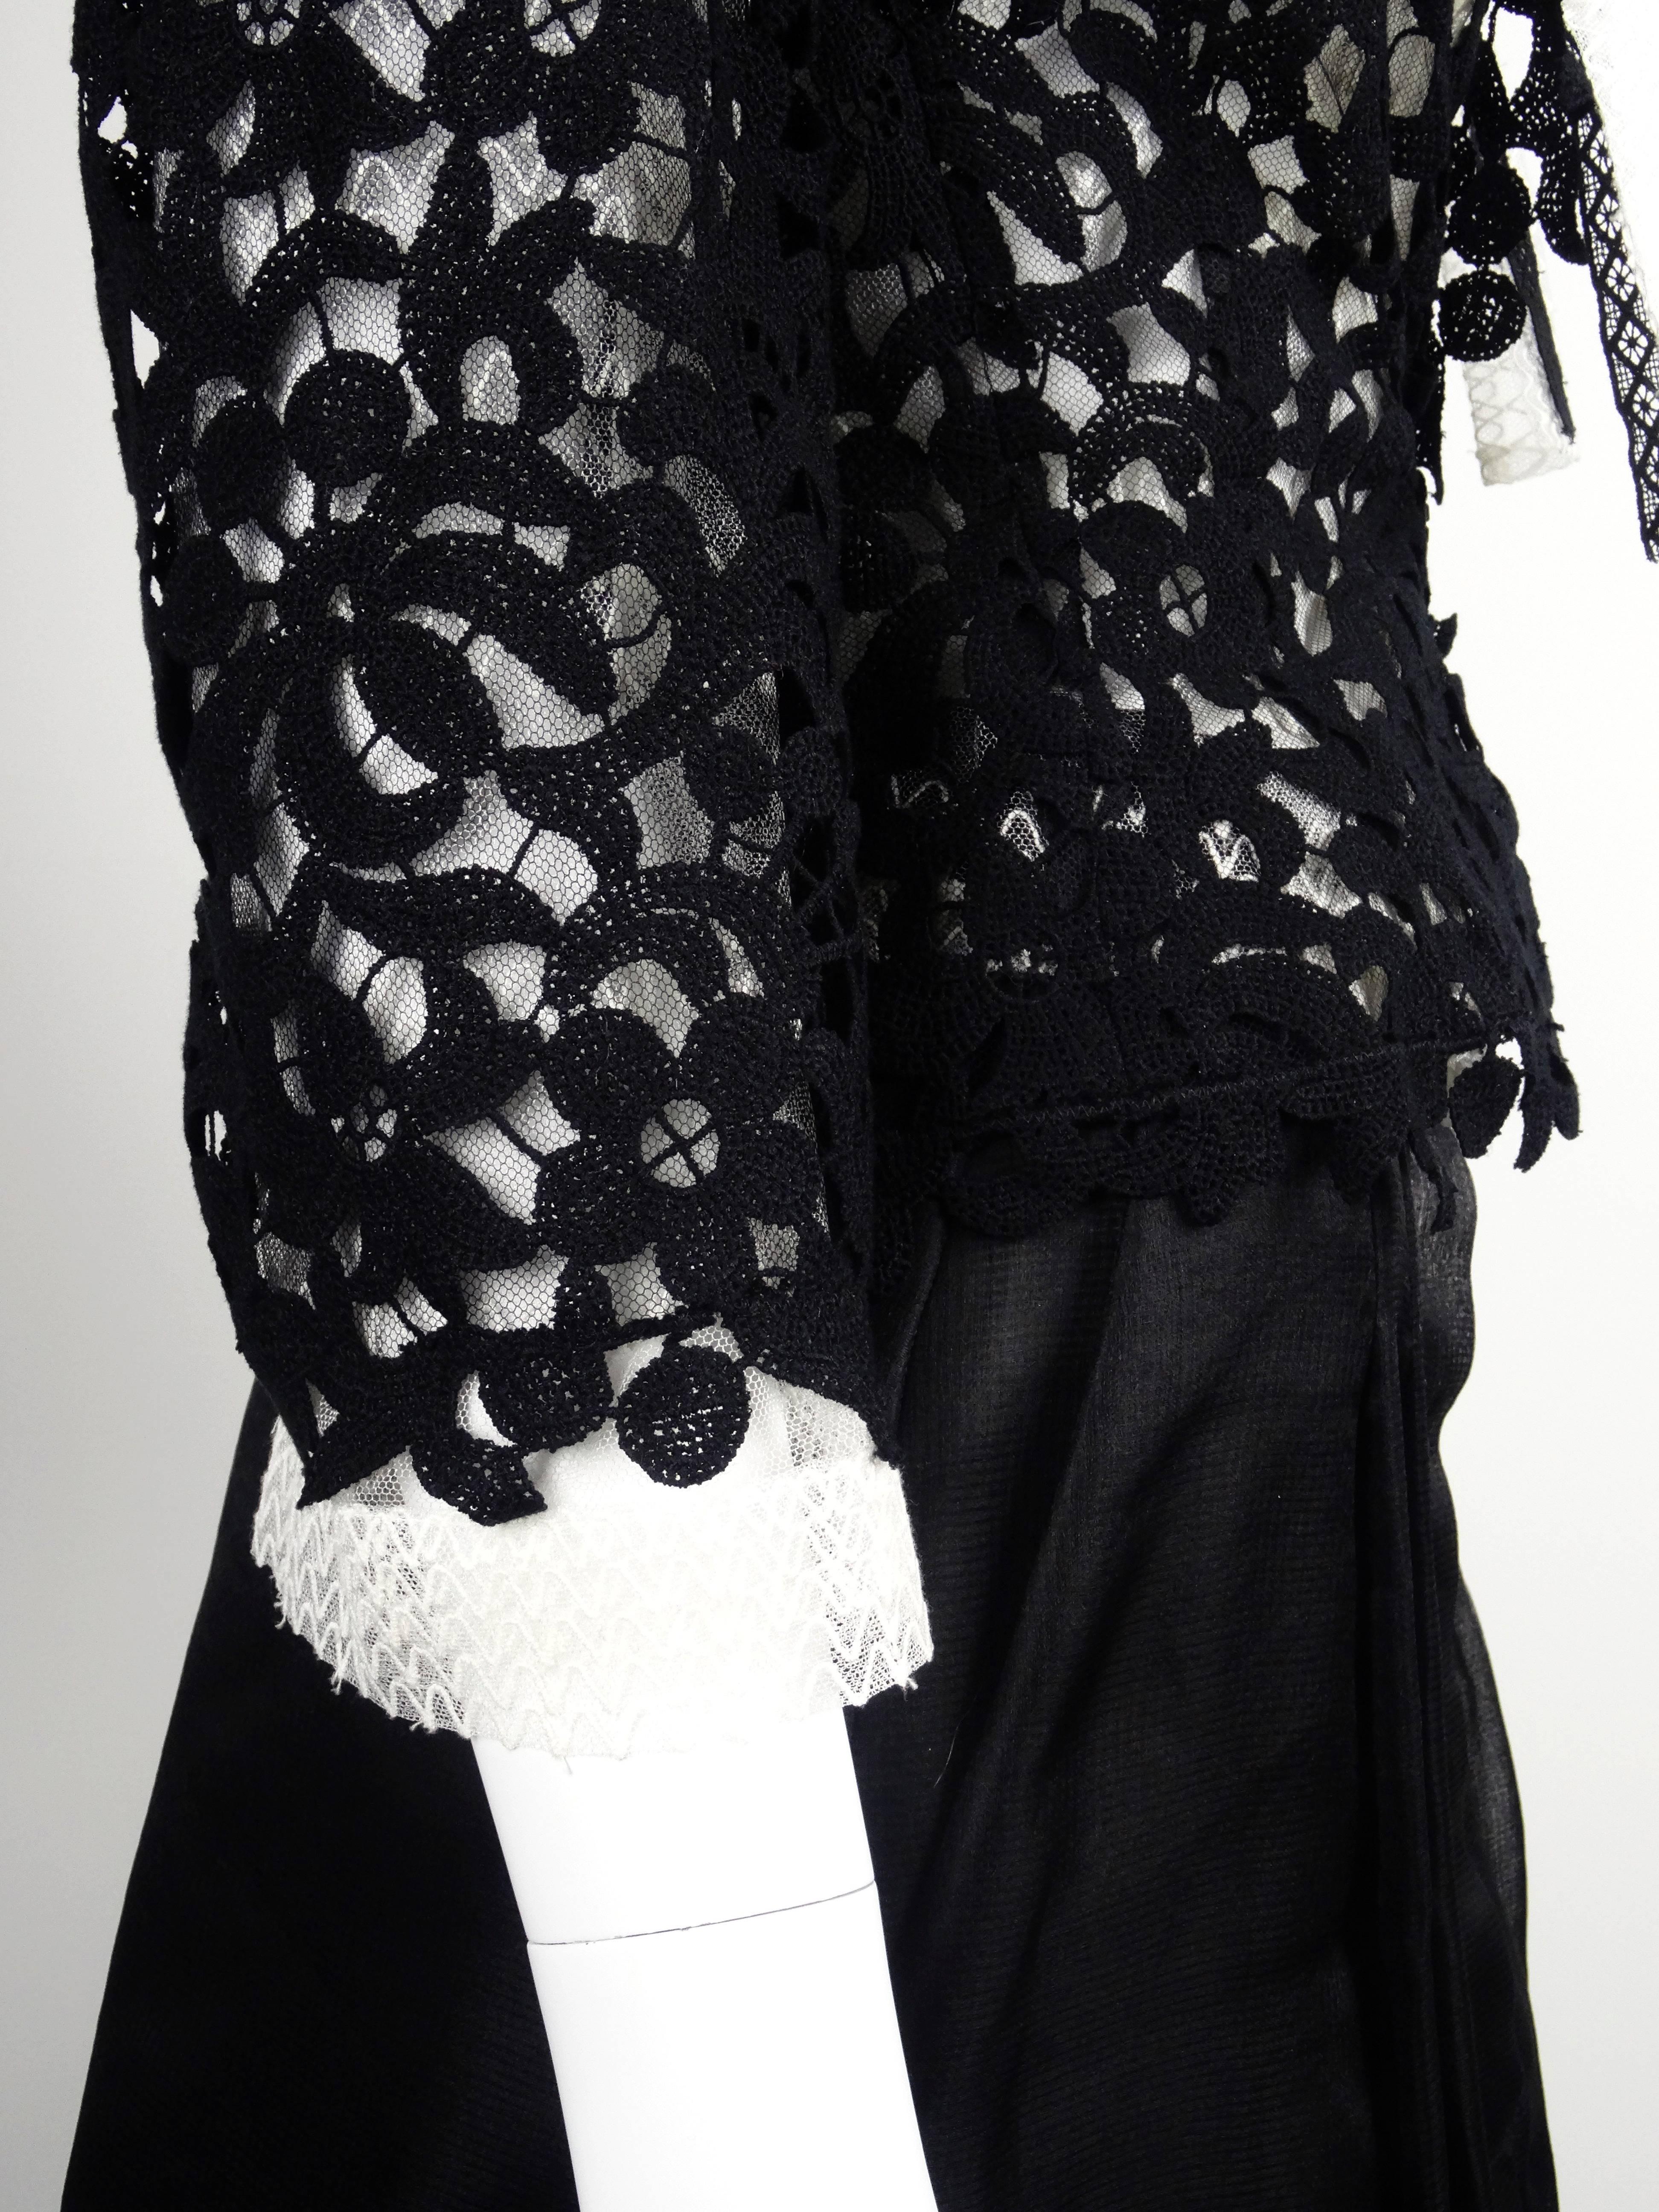 A black lace jacket and white cotton/silk/nylon lace blouse, both from the Lesage Paris venerated embroidery studio are paired by Chanel with a black silk 3/4 skirt for a rich 3-piece ensemble.  The lower third of the skirt is unlined for